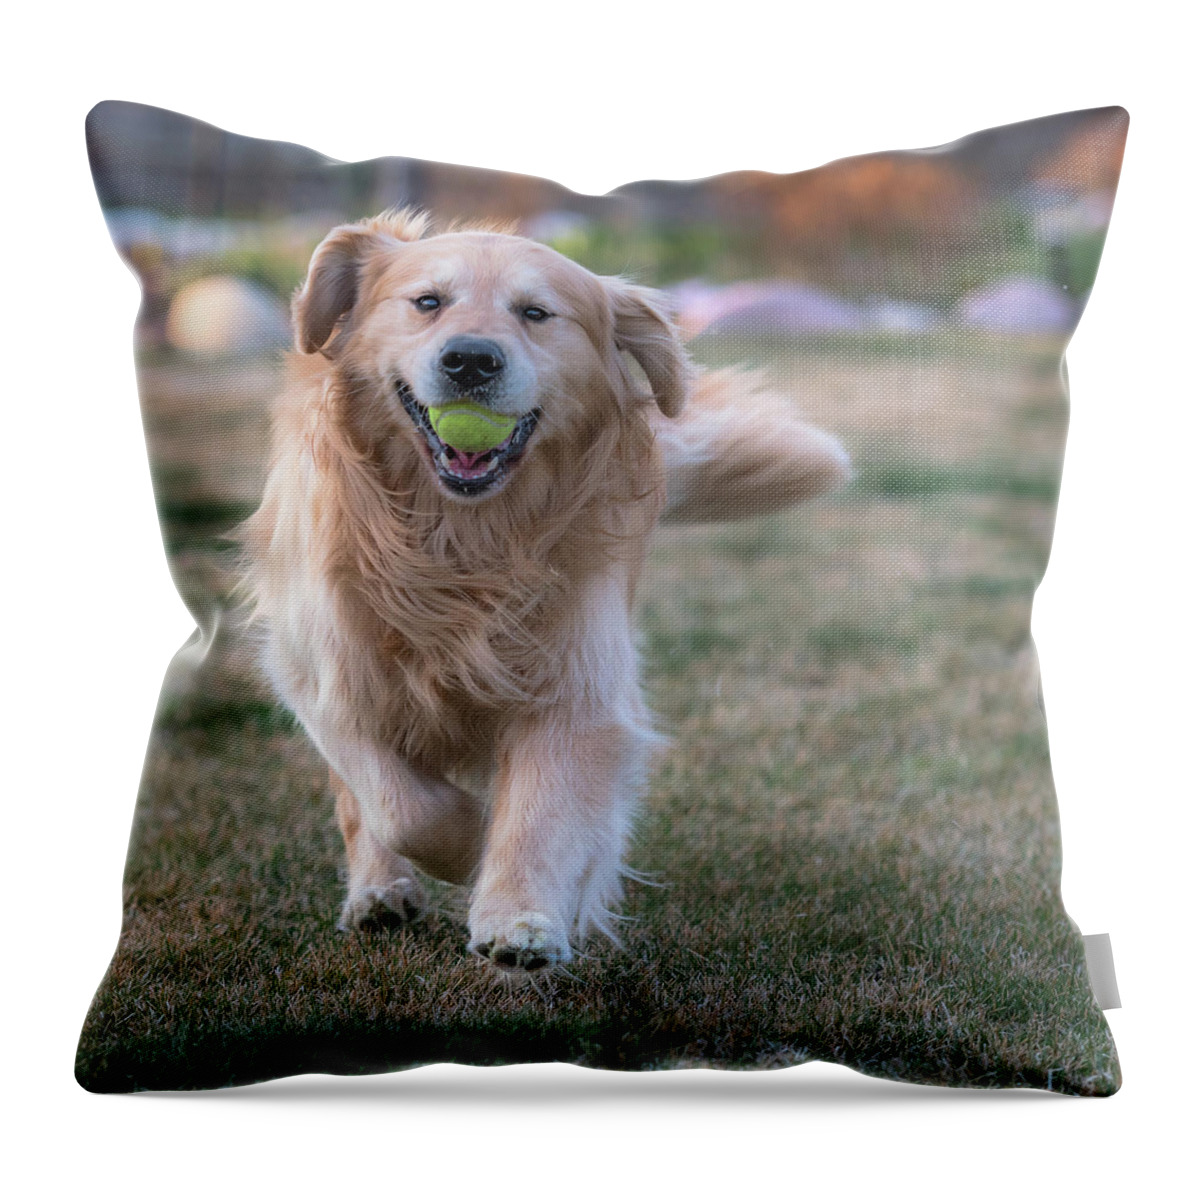 Fetch Throw Pillow featuring the photograph Fetch by Jennifer Grossnickle